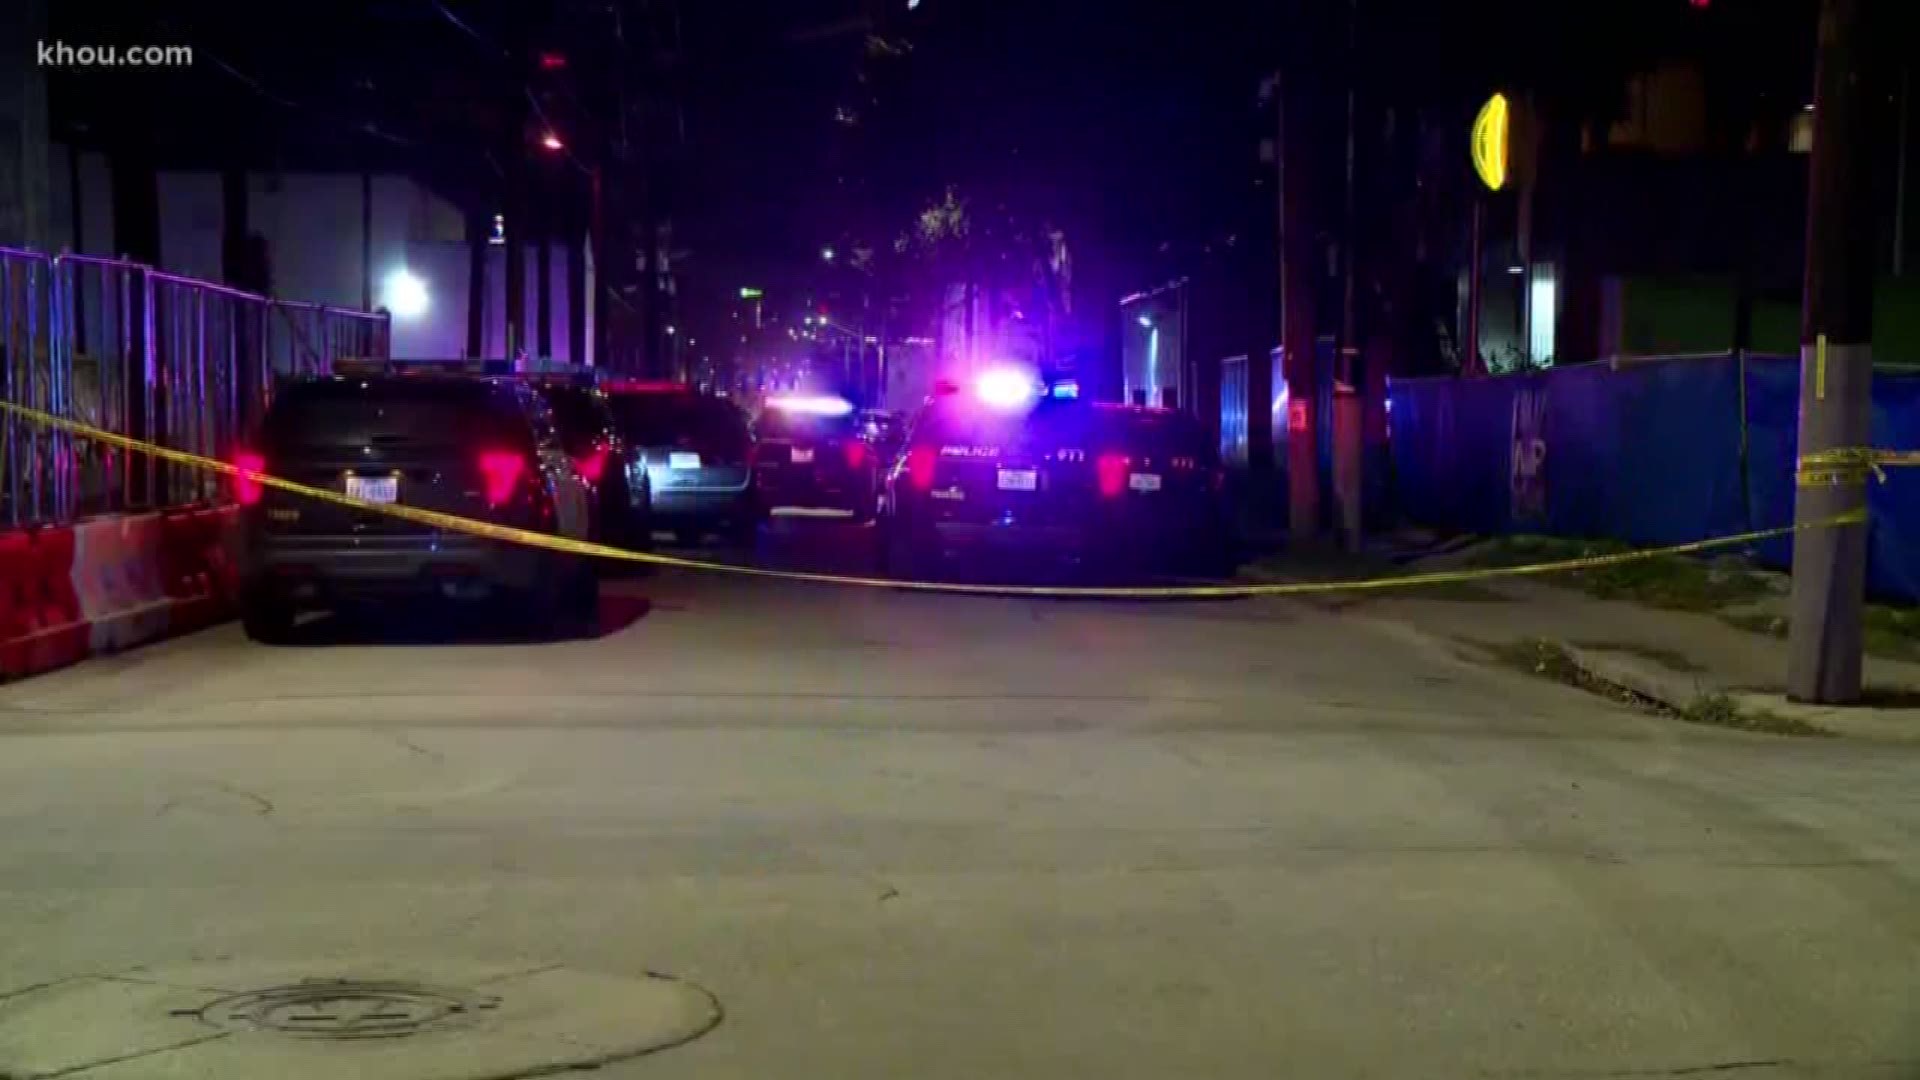 Two people were killed and five other victims were injured in a shooting inside a venue along San Antonio's Museum Reach portion of the River Walk late Jan. 19, 2019